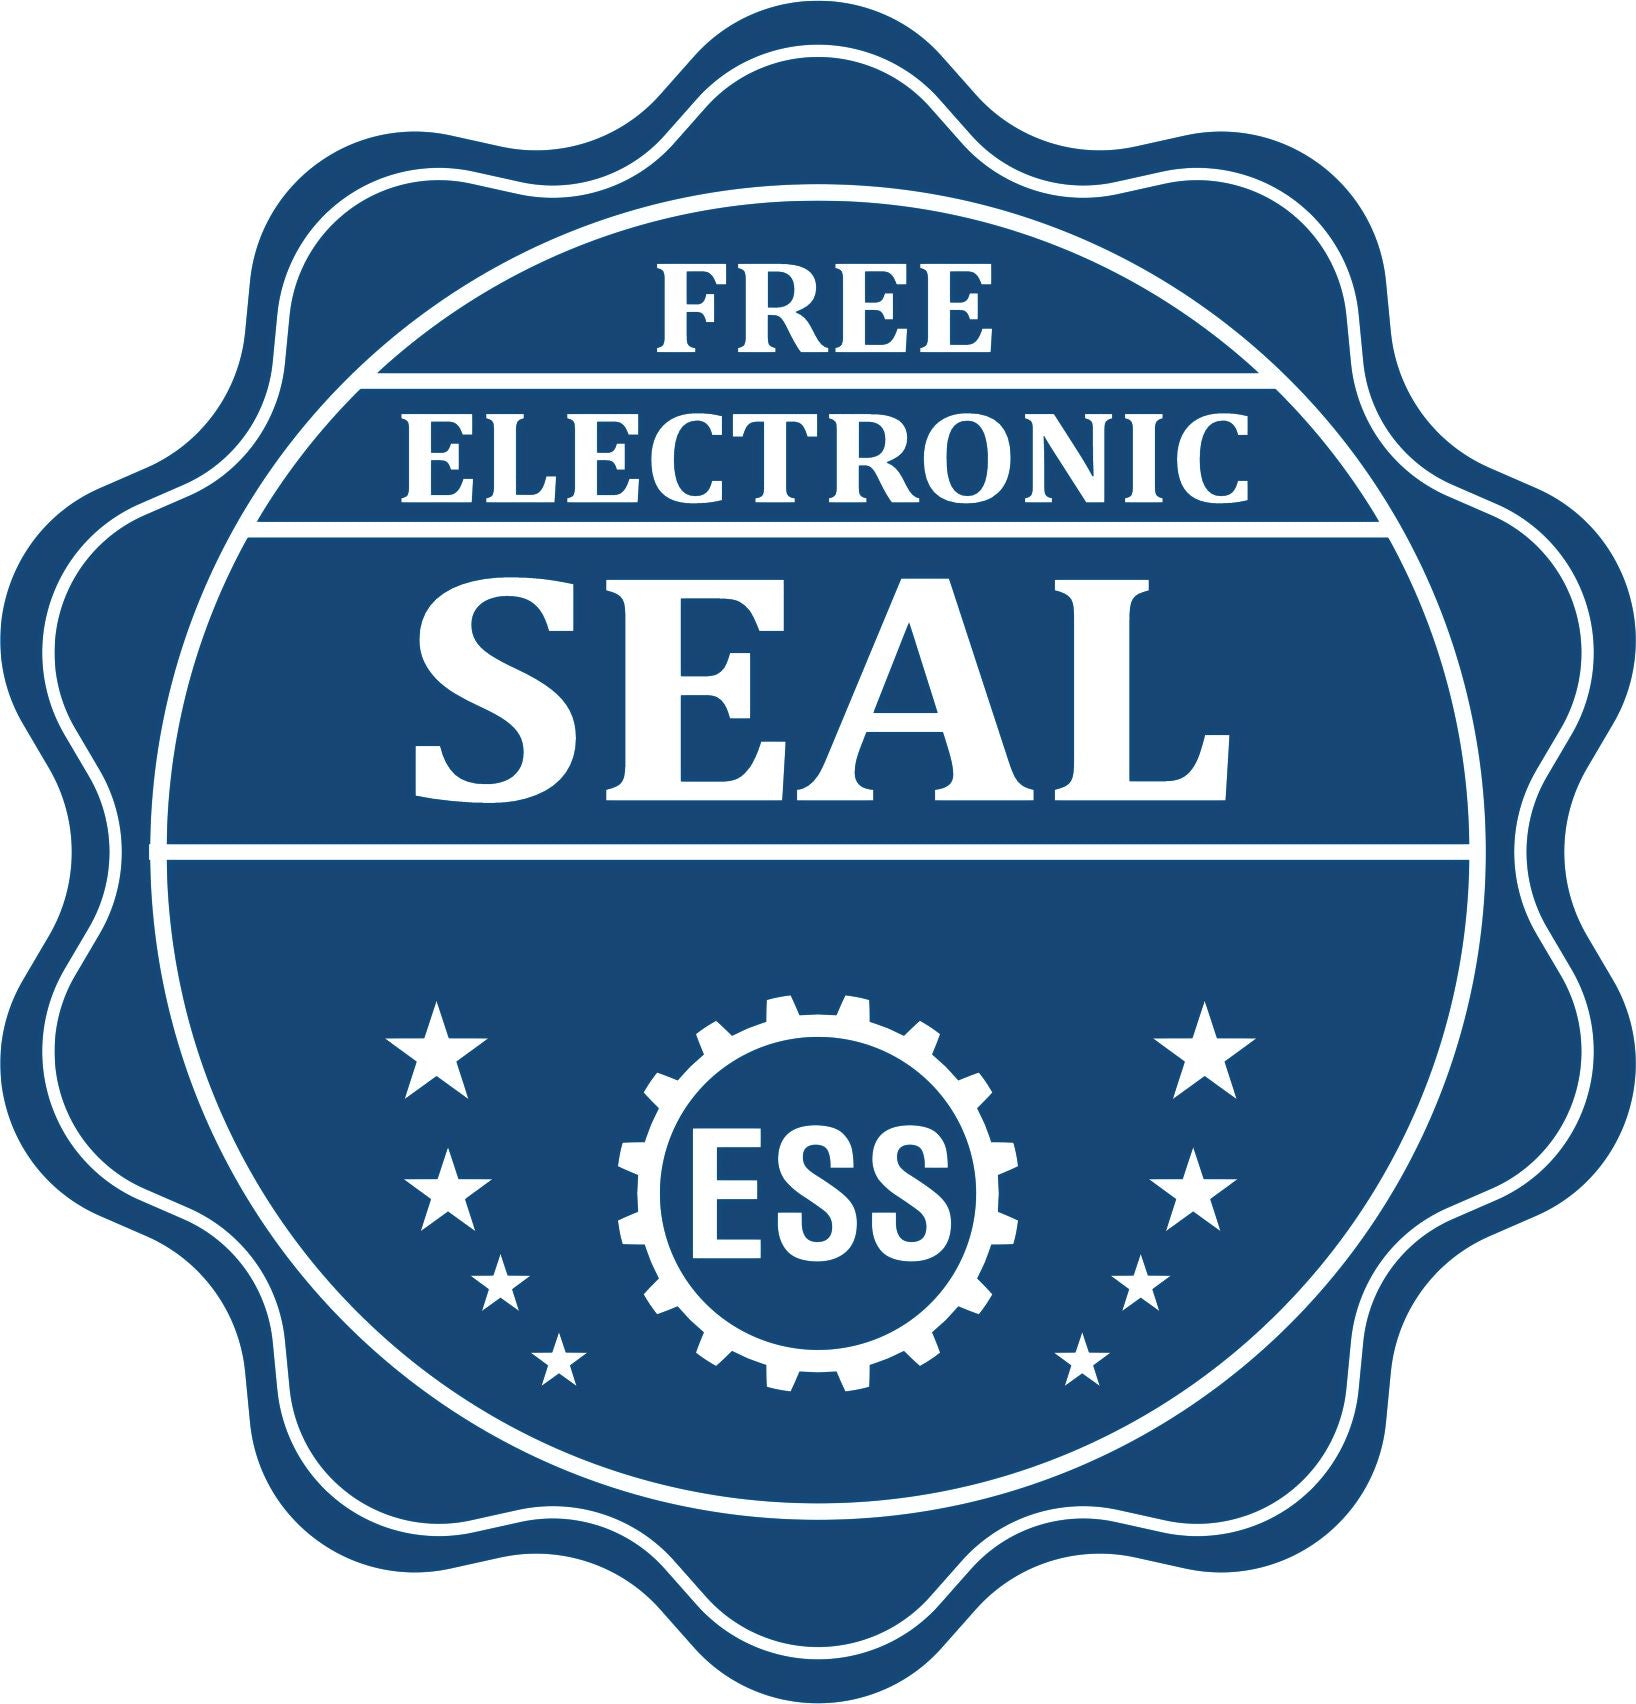 A badge showing a free electronic seal for the Slim Pre-Inked Utah Professional Geologist Seal Stamp with stars and the ESS gear on the emblem.